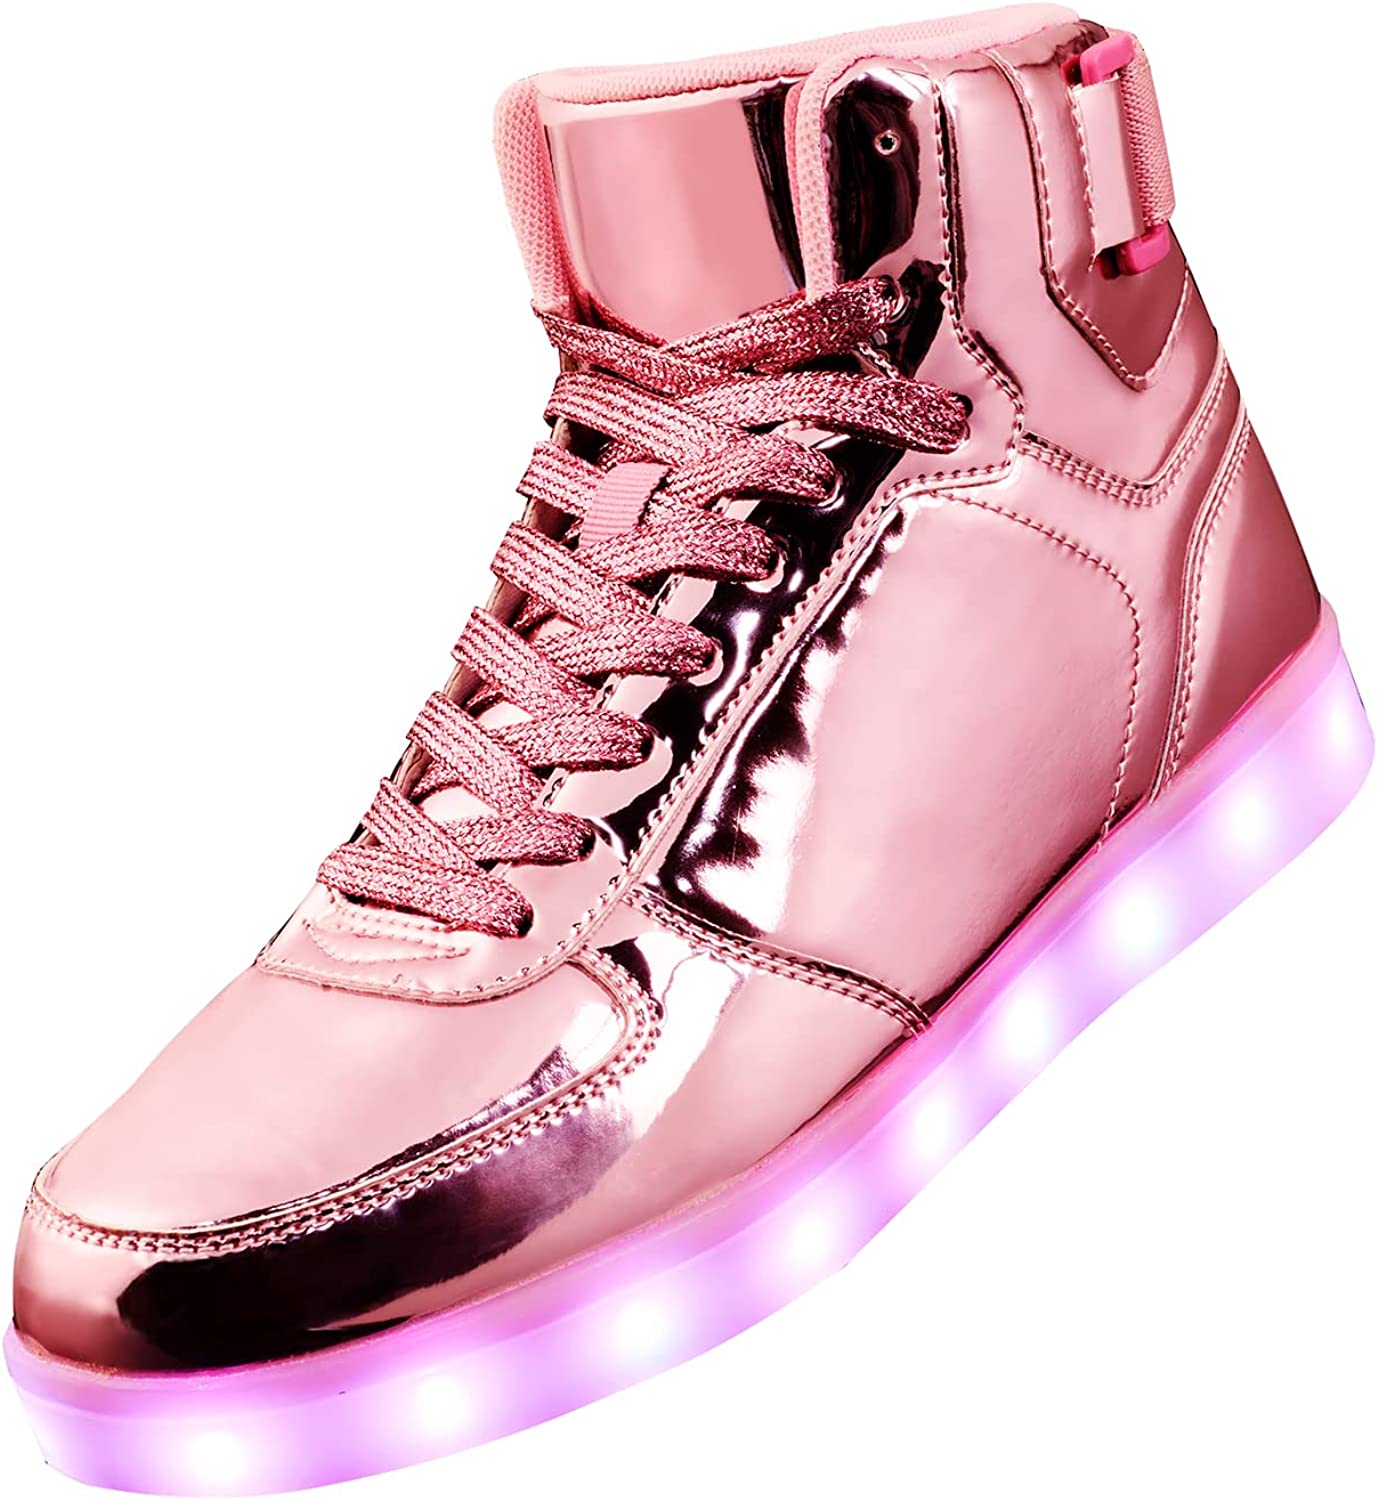 DIYJTS Unisex LED Light Up Shoes, Fashion High Top LED Sneakers USB  Rechargeable Glowing Luminous Shoes for Men, Women, Teens - AllEars.Net